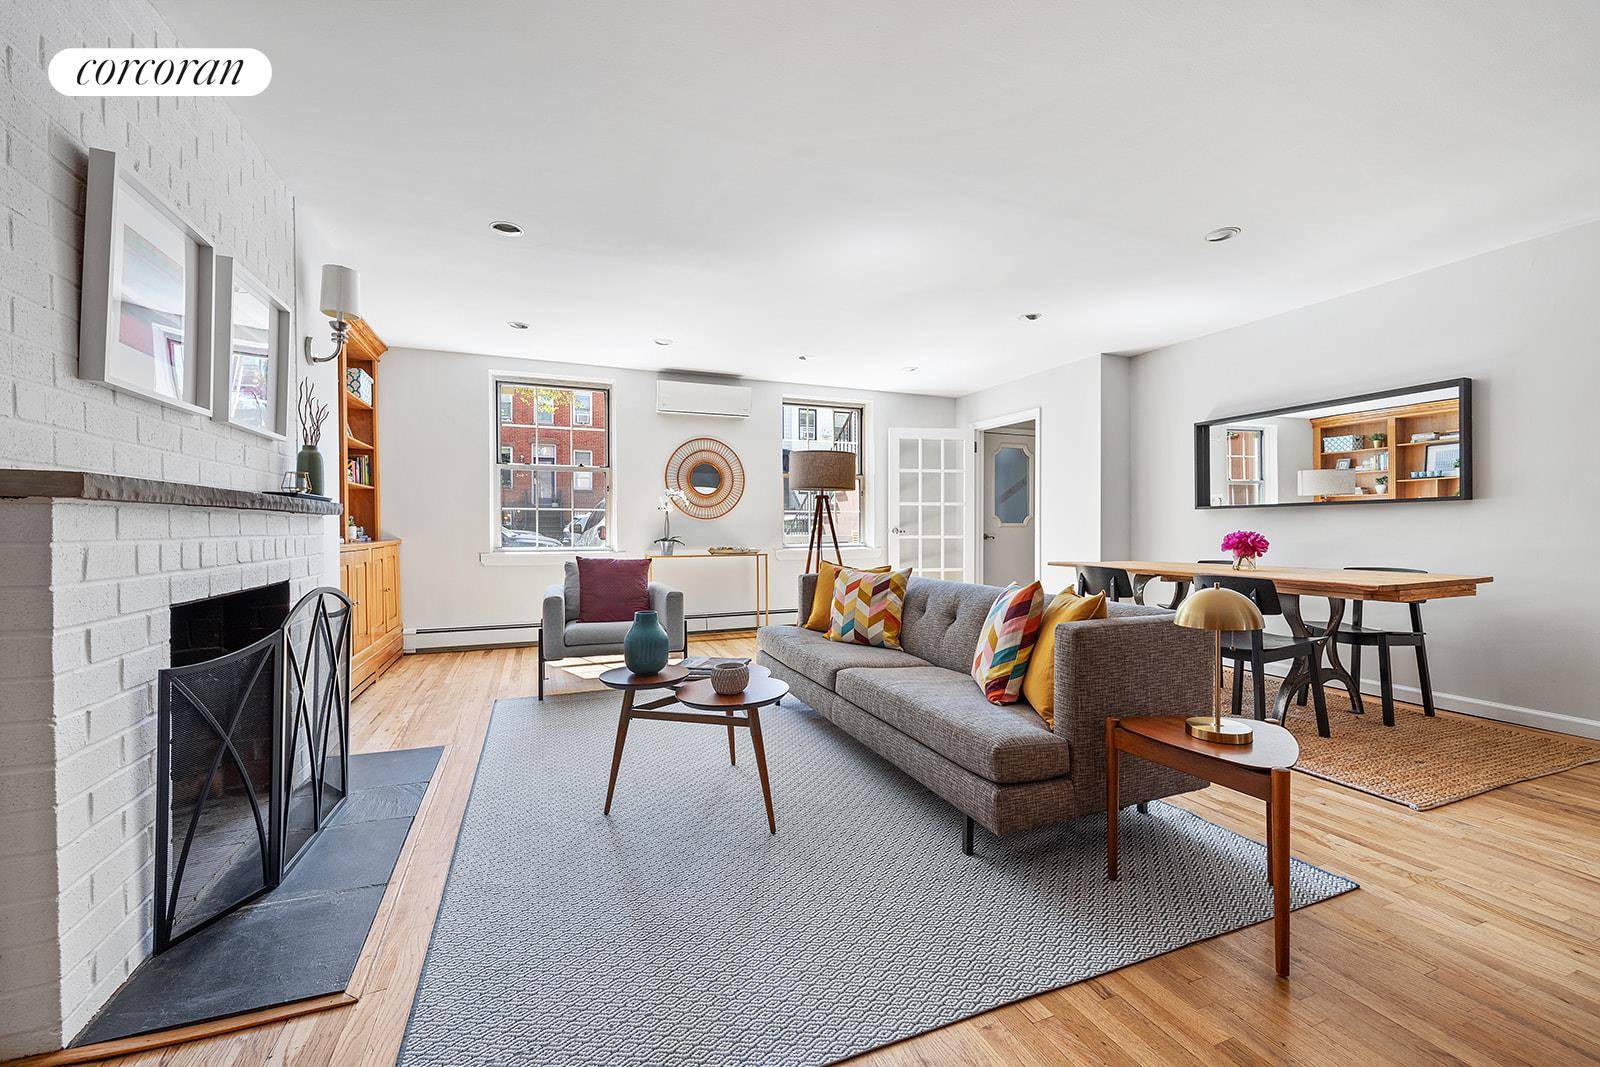 Wonderfully located in the heart of Carroll Gardens, this sprawling four bedroom, three bath duplex offers over 1800 square feet of living space, a PRIVATE GARDEN measuring 750 square feet, ...